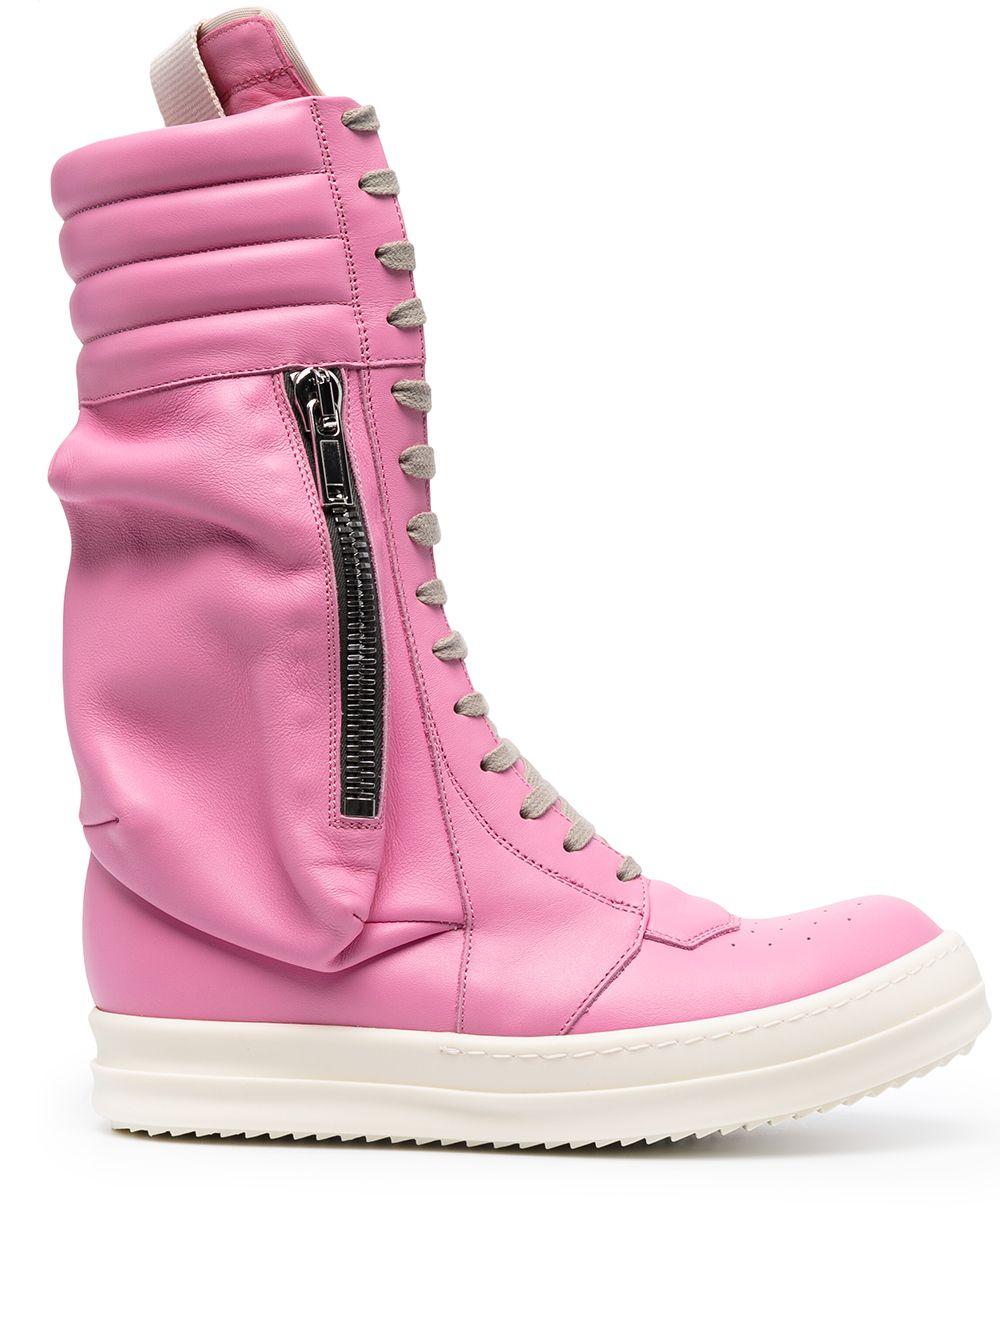 Rick Owens Leather Sneaker Boots in Pink | Lyst